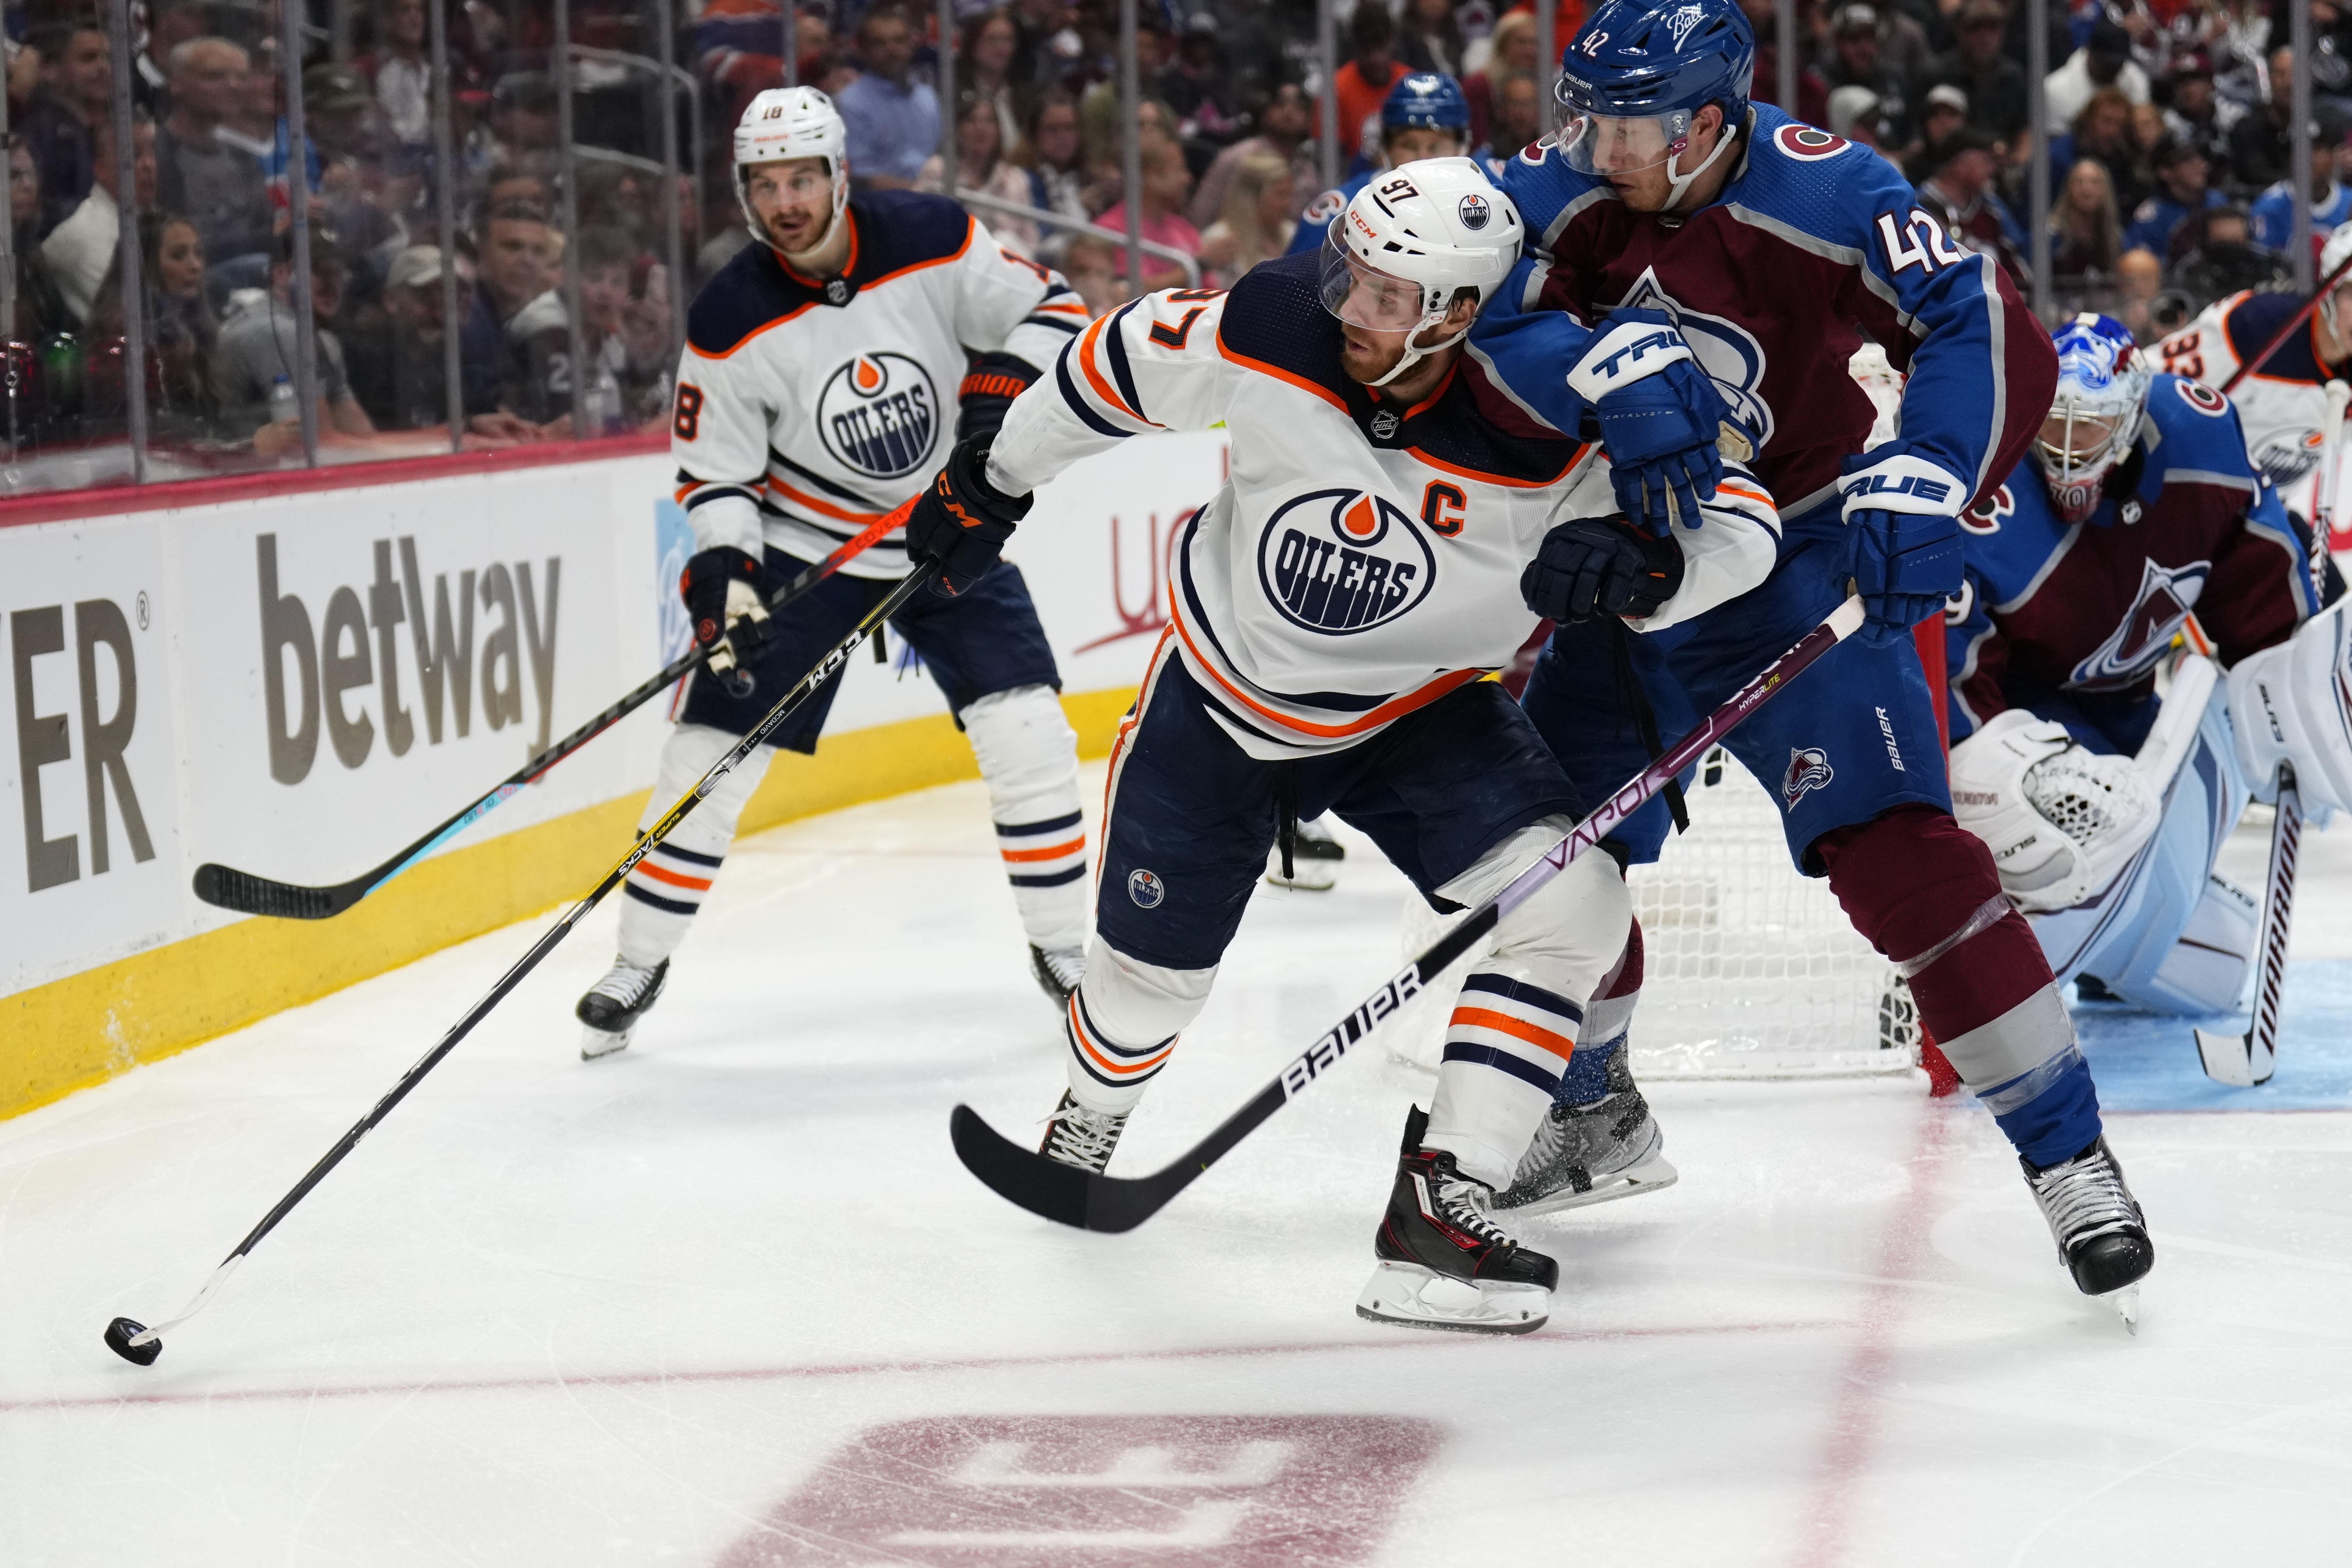 Oilers goaltender Mike Smith to start Game 2, Avalanche counterpart Darcy  Kuemper out